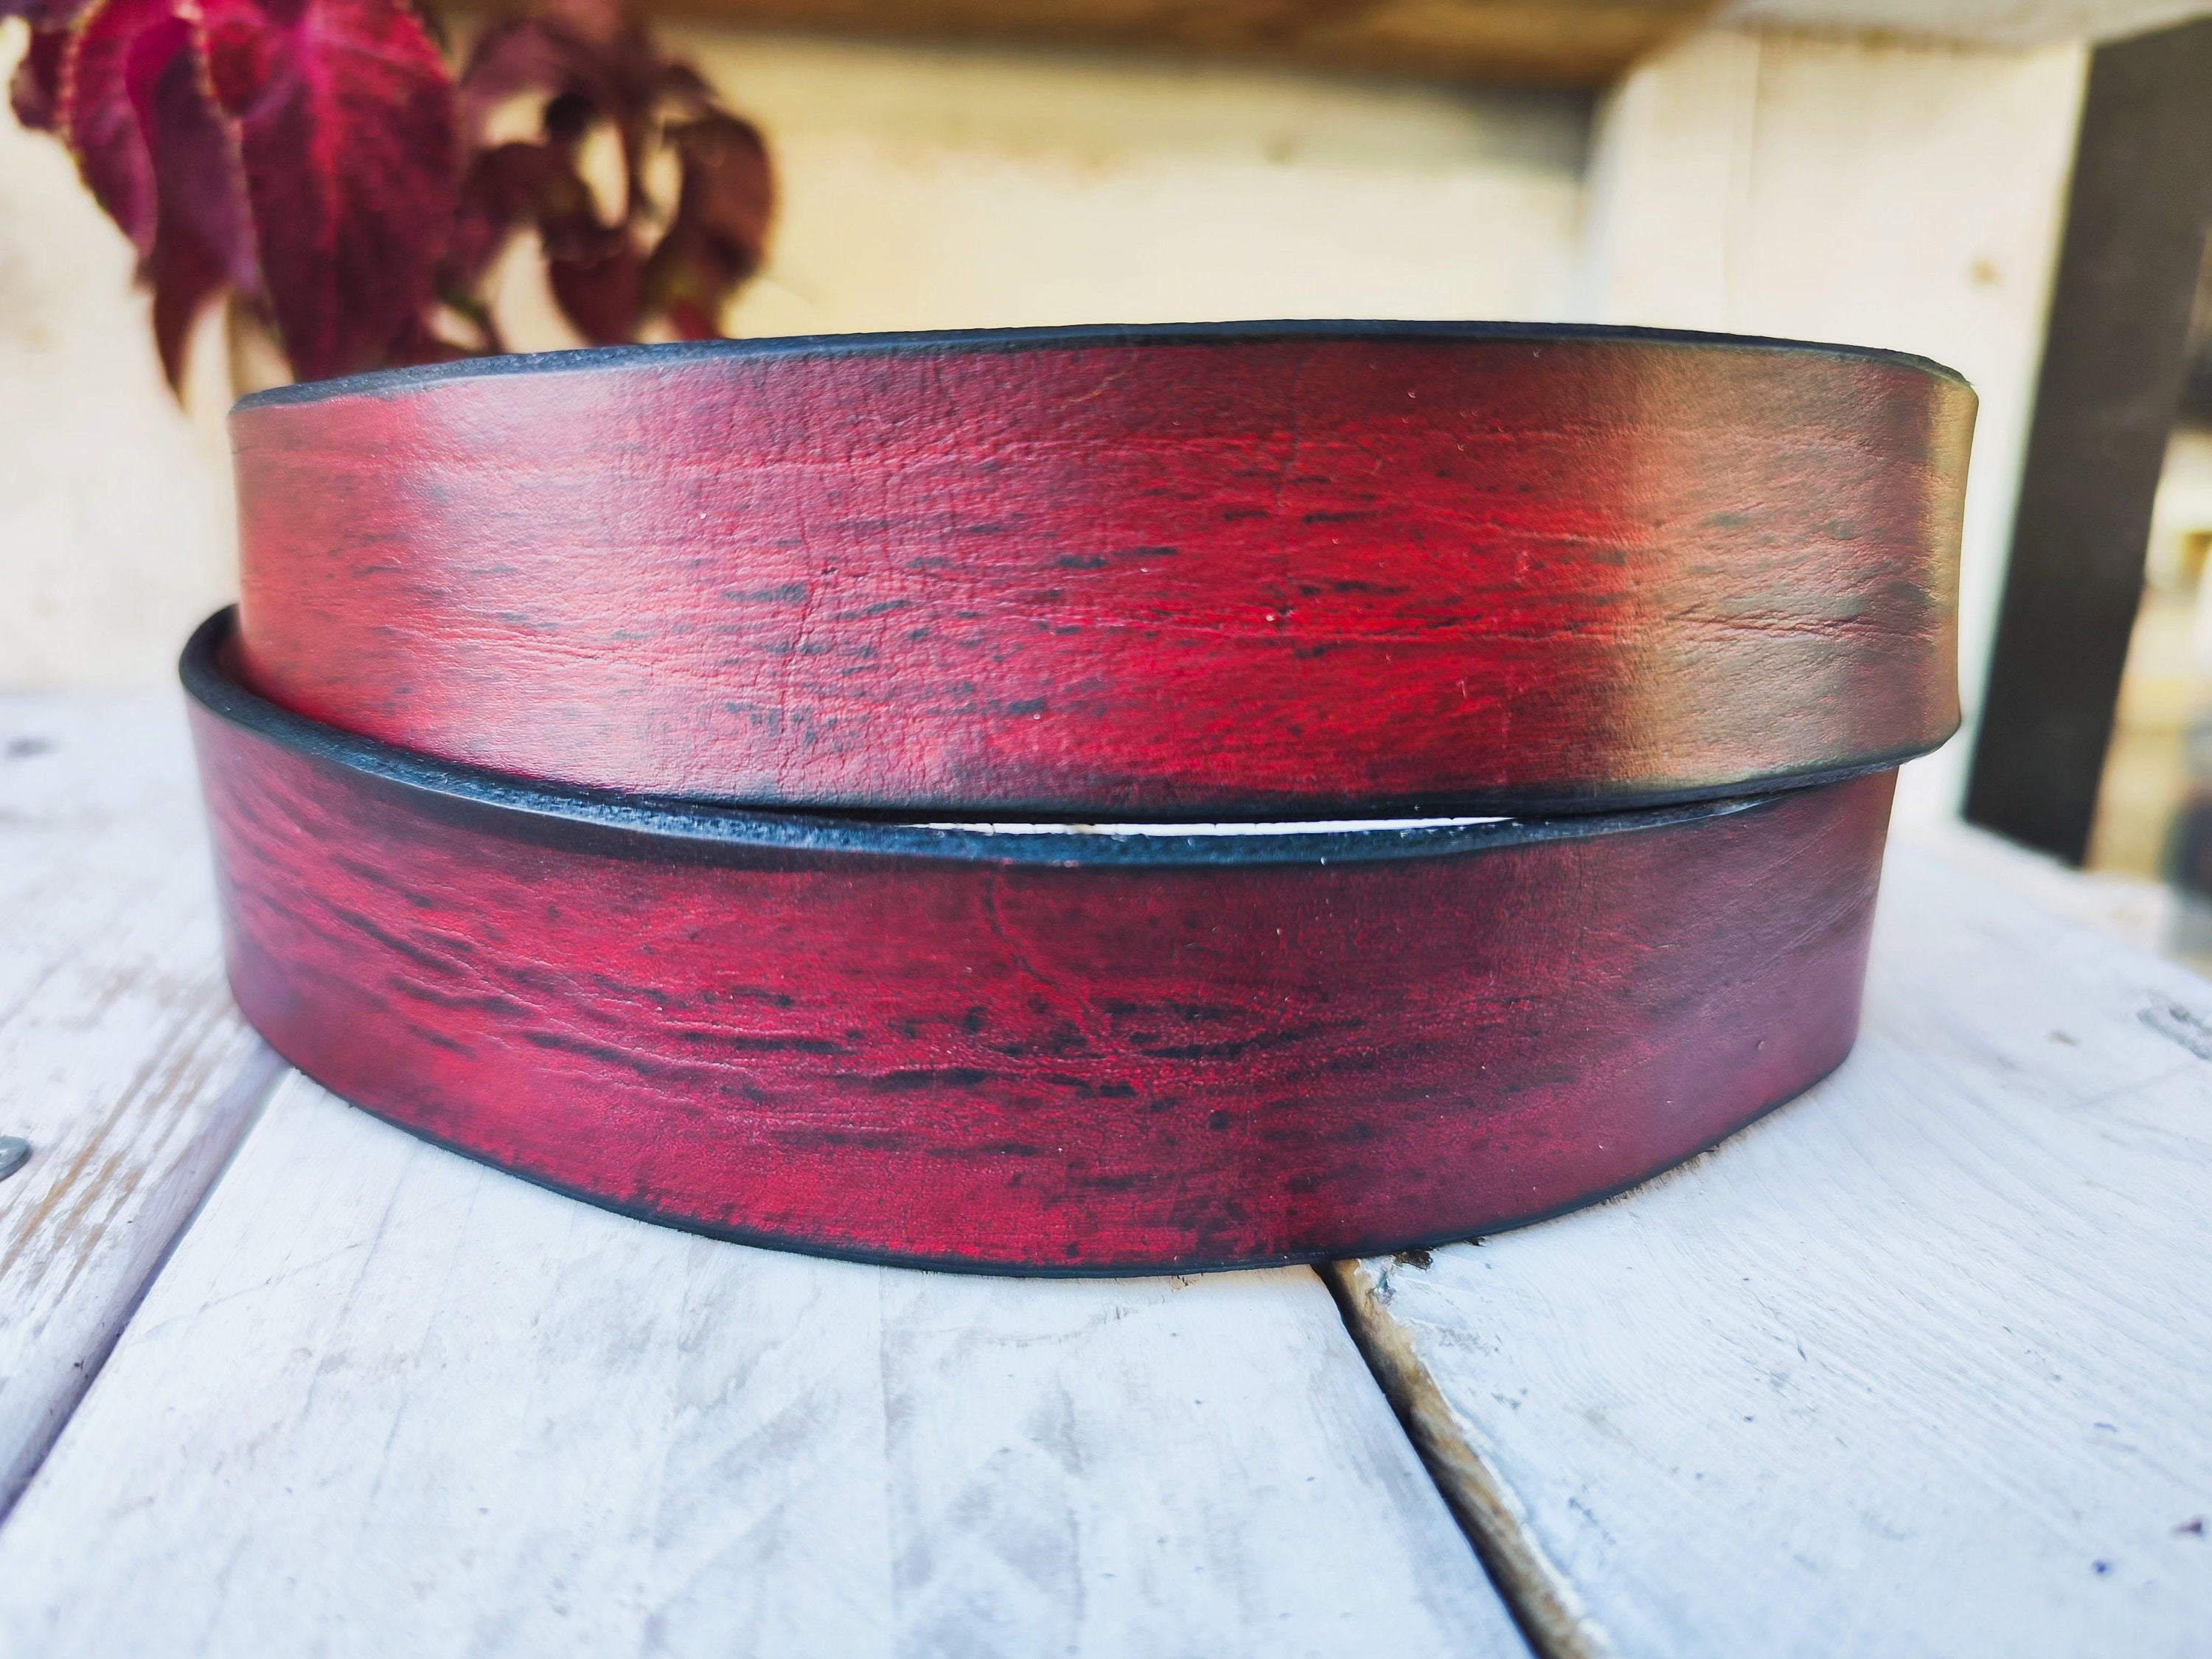 Handmade Red Leather Belt with Black Wash, Unique Design with Black End connect with two Pieces and Bronze Rivet Decorations